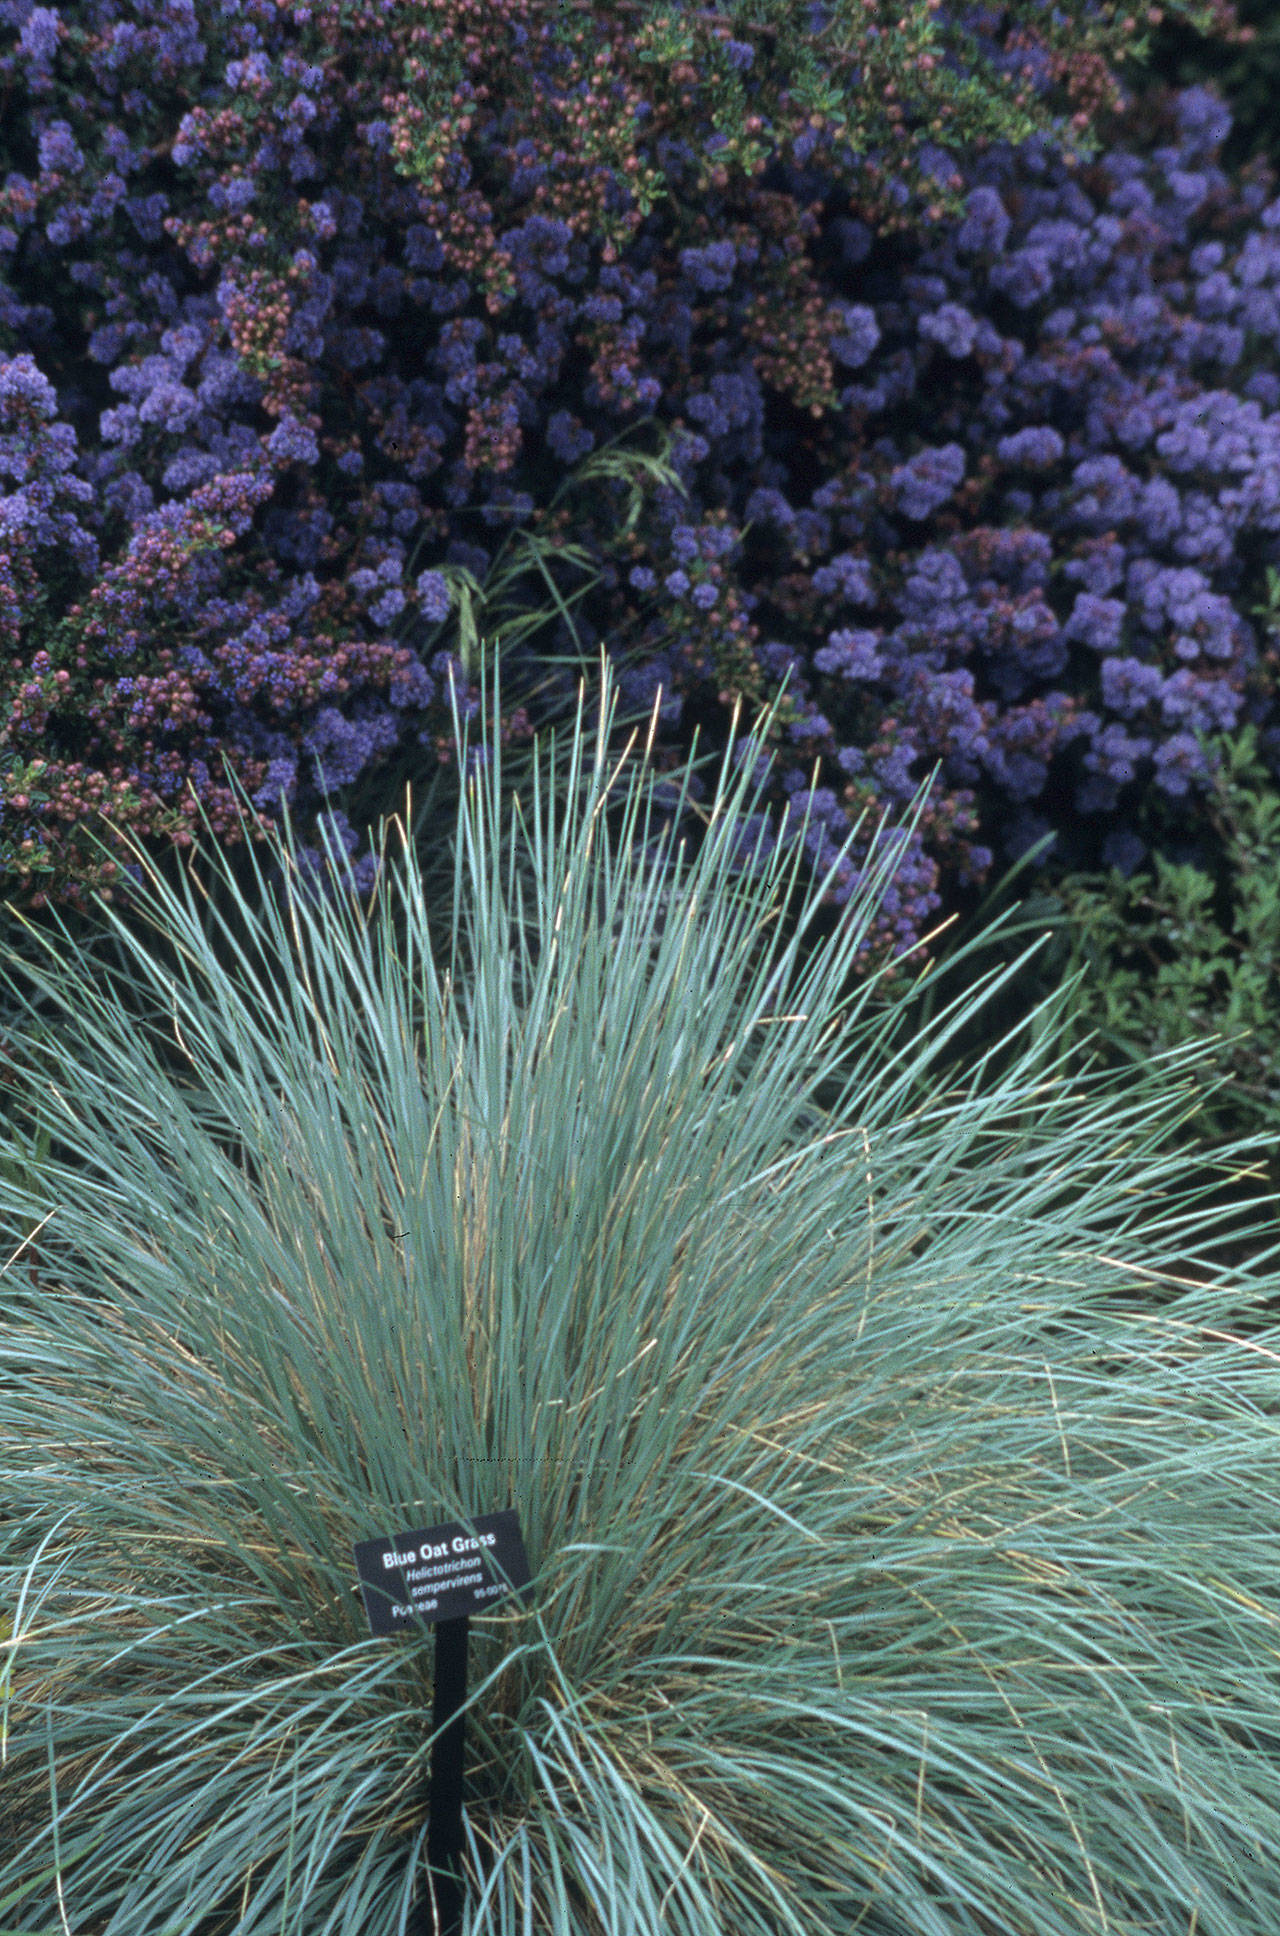 Blue oat grass has year-round spiky blue foliage and purplish-brown seed heads in summer. (Great Plant Picks)